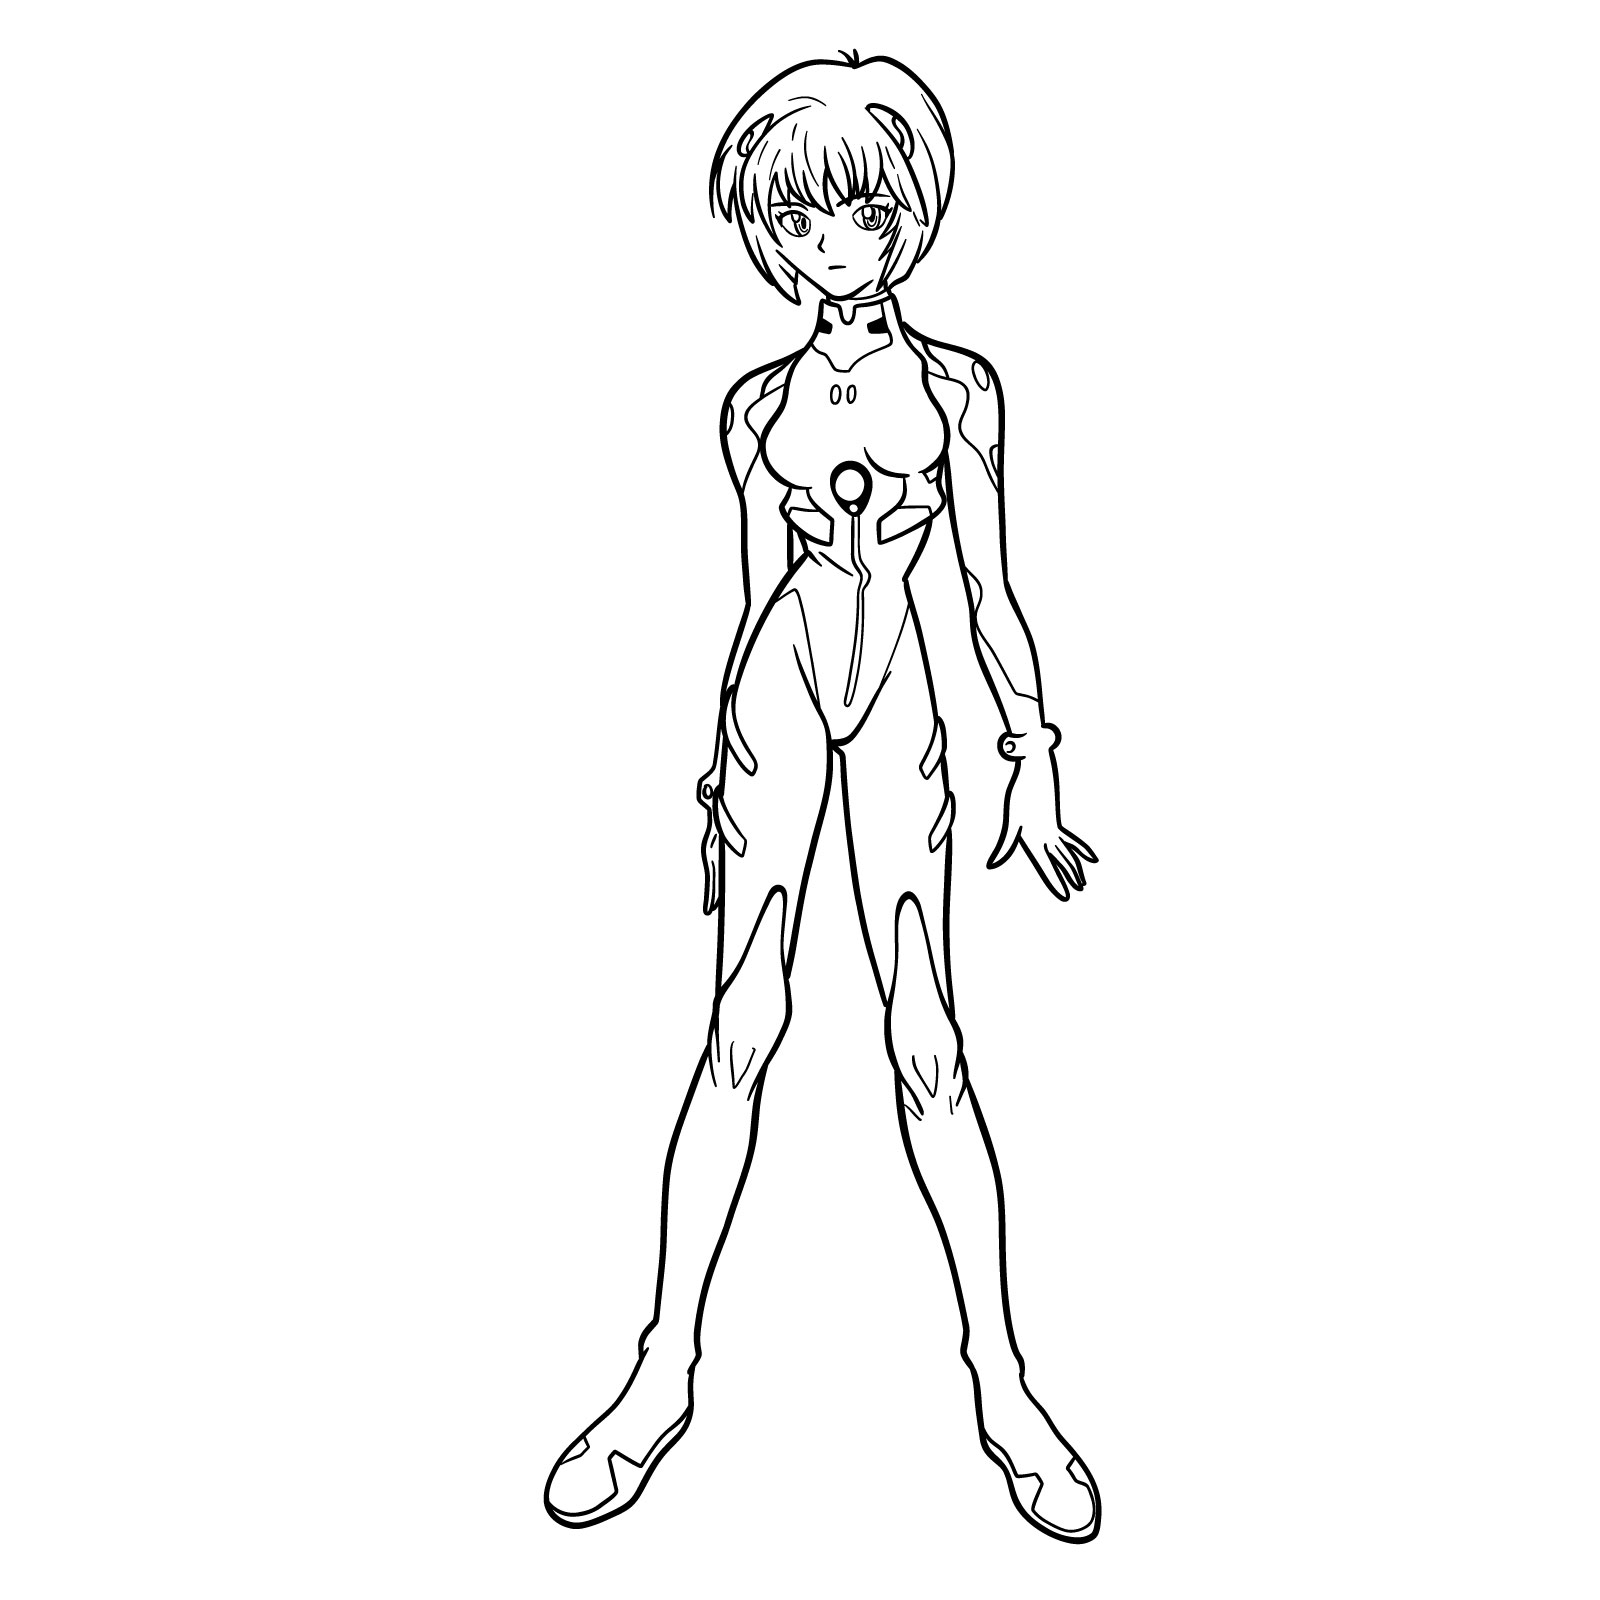 How to Draw Rei Ayanami in plugsuit (Rebuild) - final step